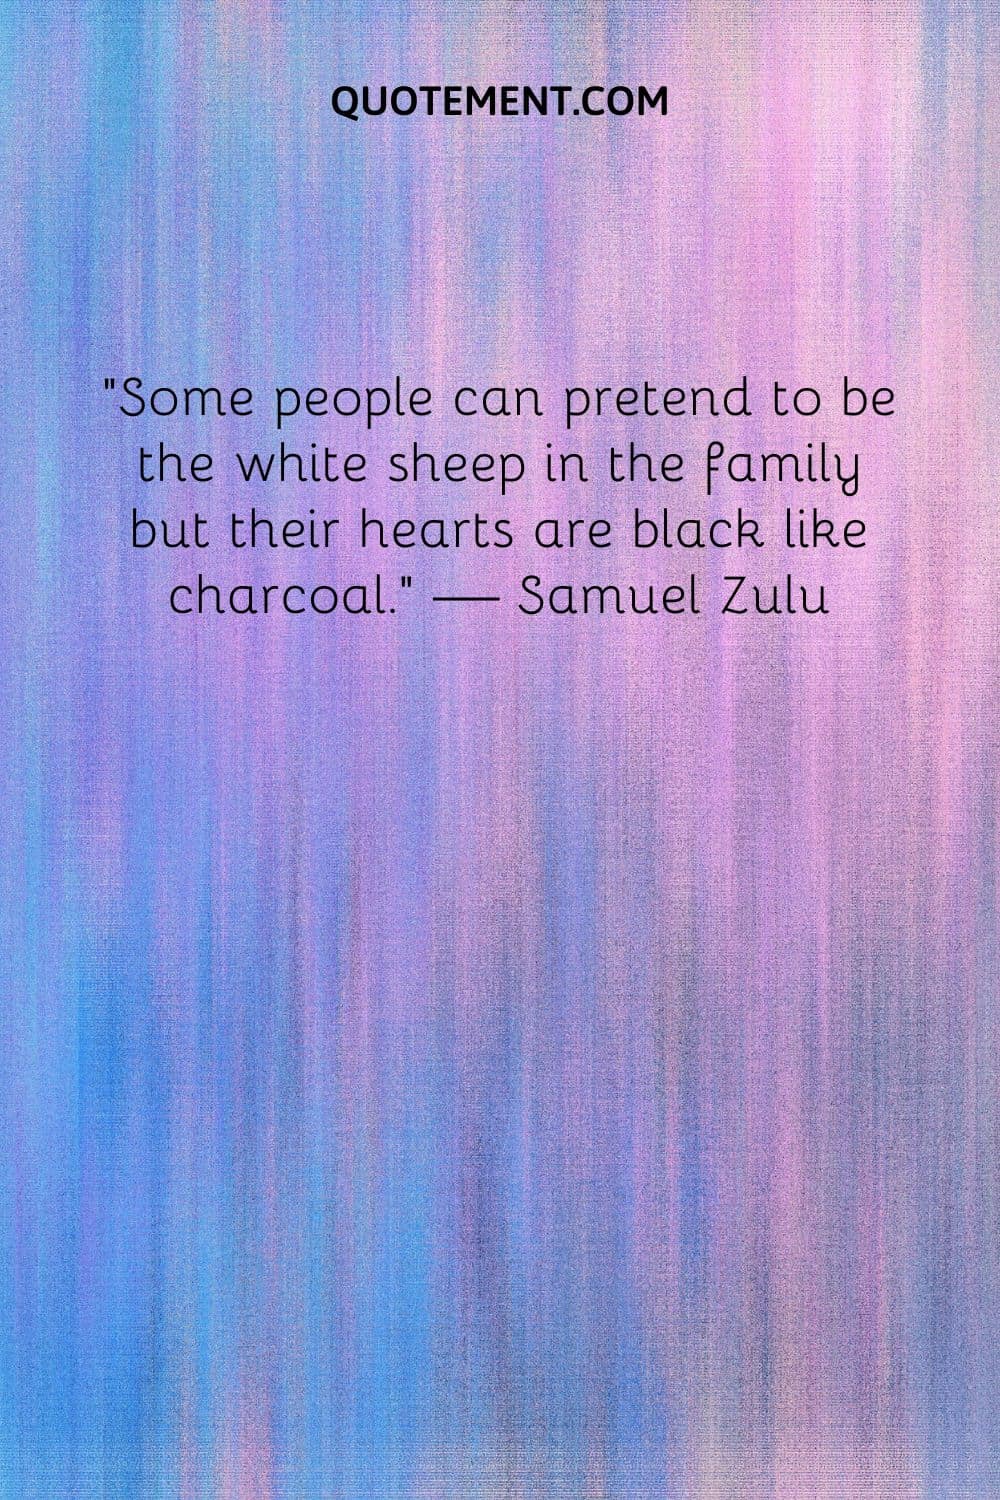 Some people can pretend to be the white sheep in the family but their hearts are black like charcoal